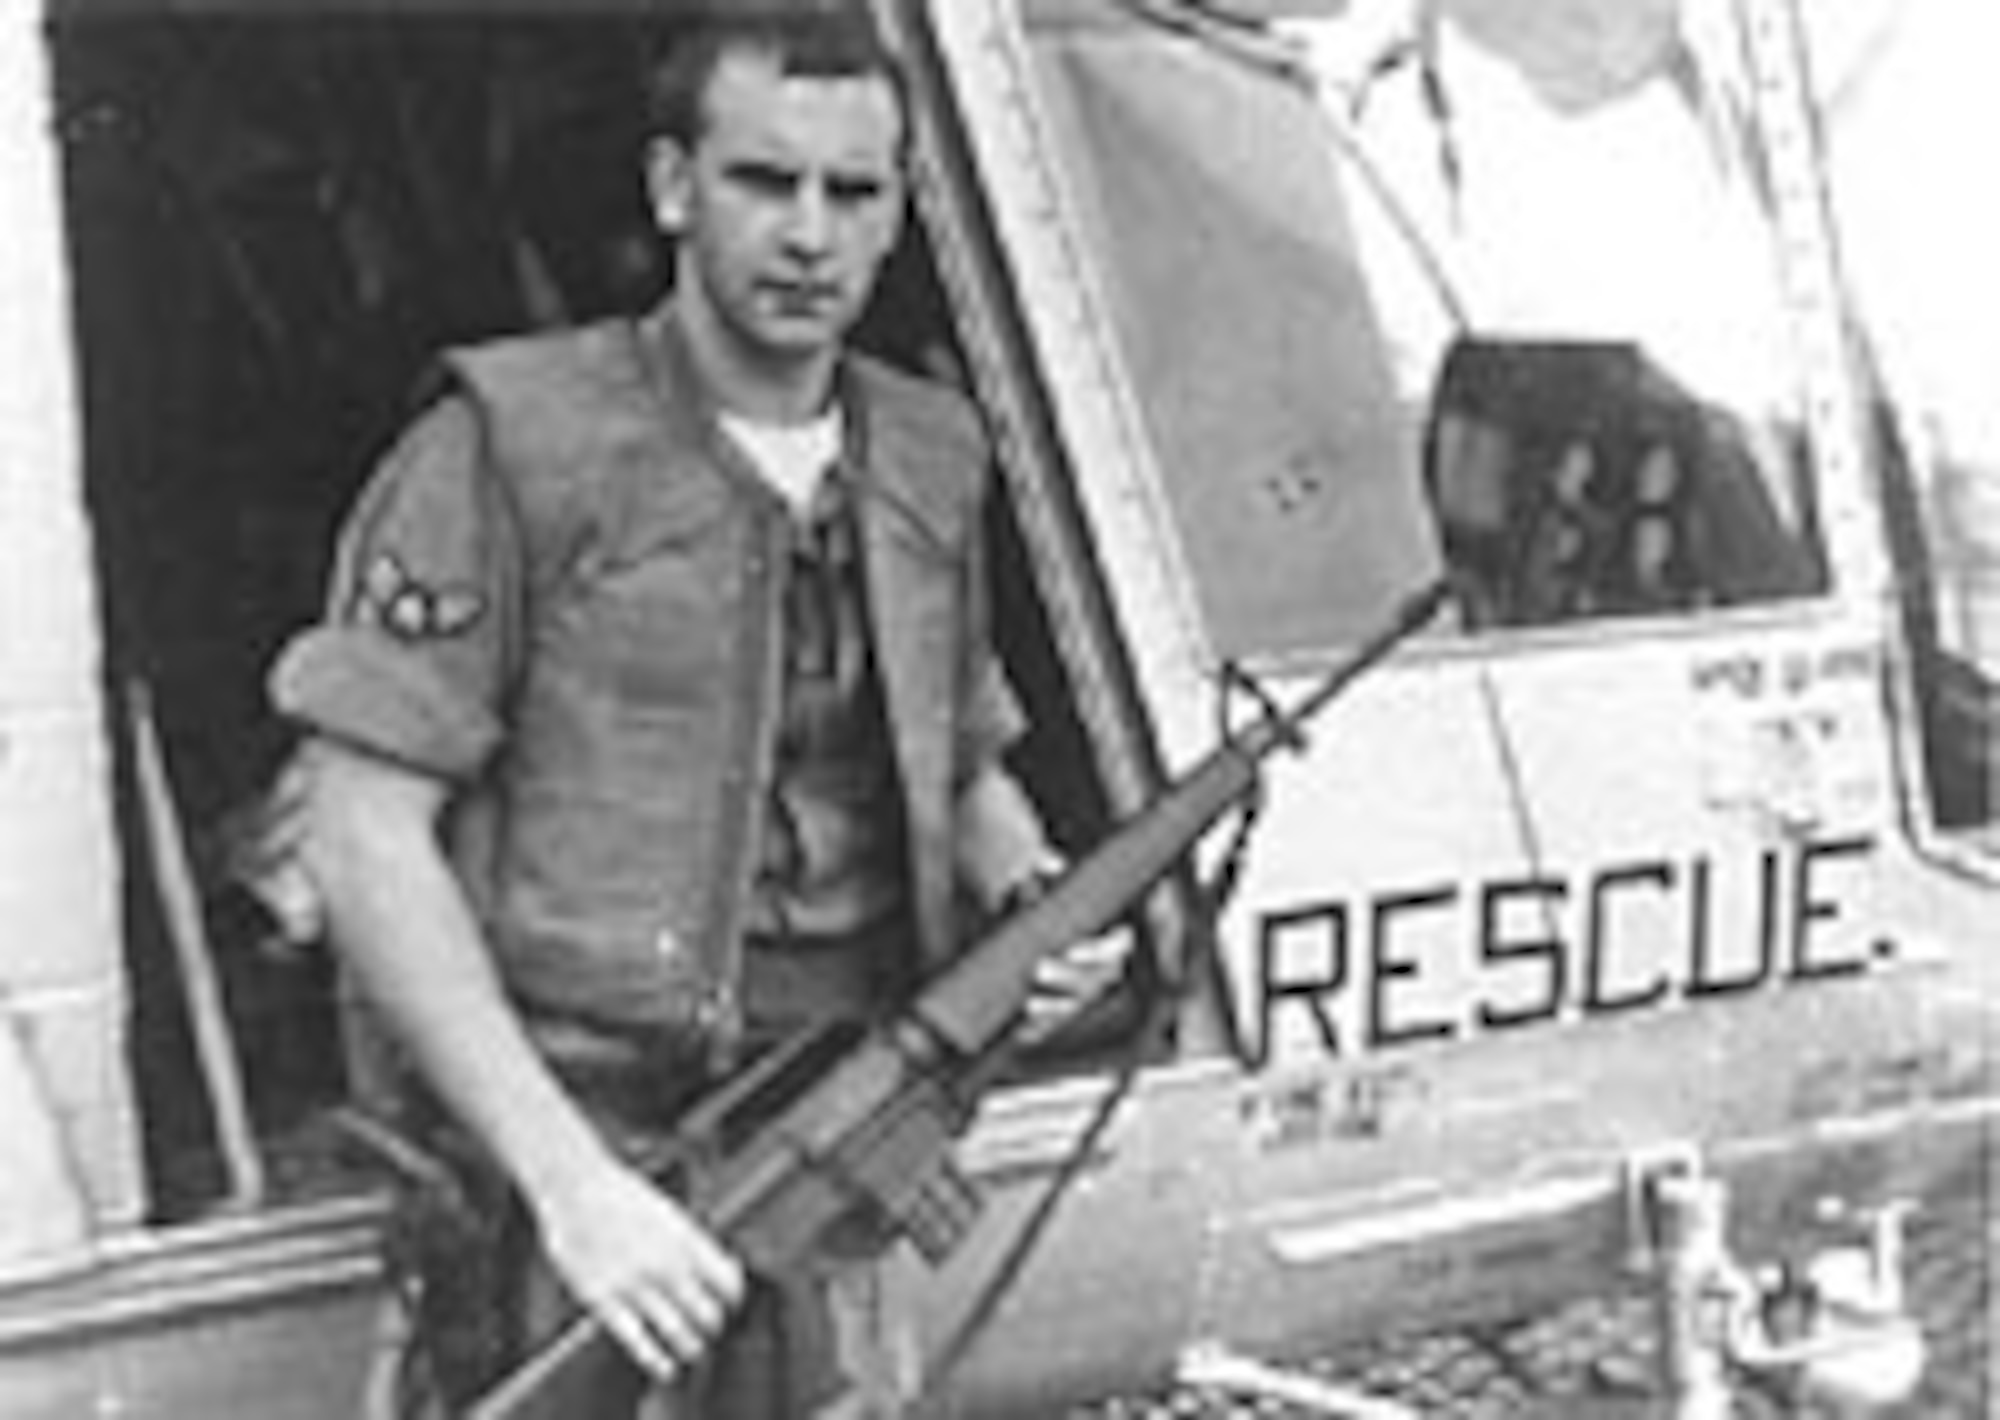 1960's -- Airman 1st Class William Pitsenbarger posthumously received the Medal of Honor and a promotion to staff sergeant  for actions in the Vietnam War. (Courtesy photo)